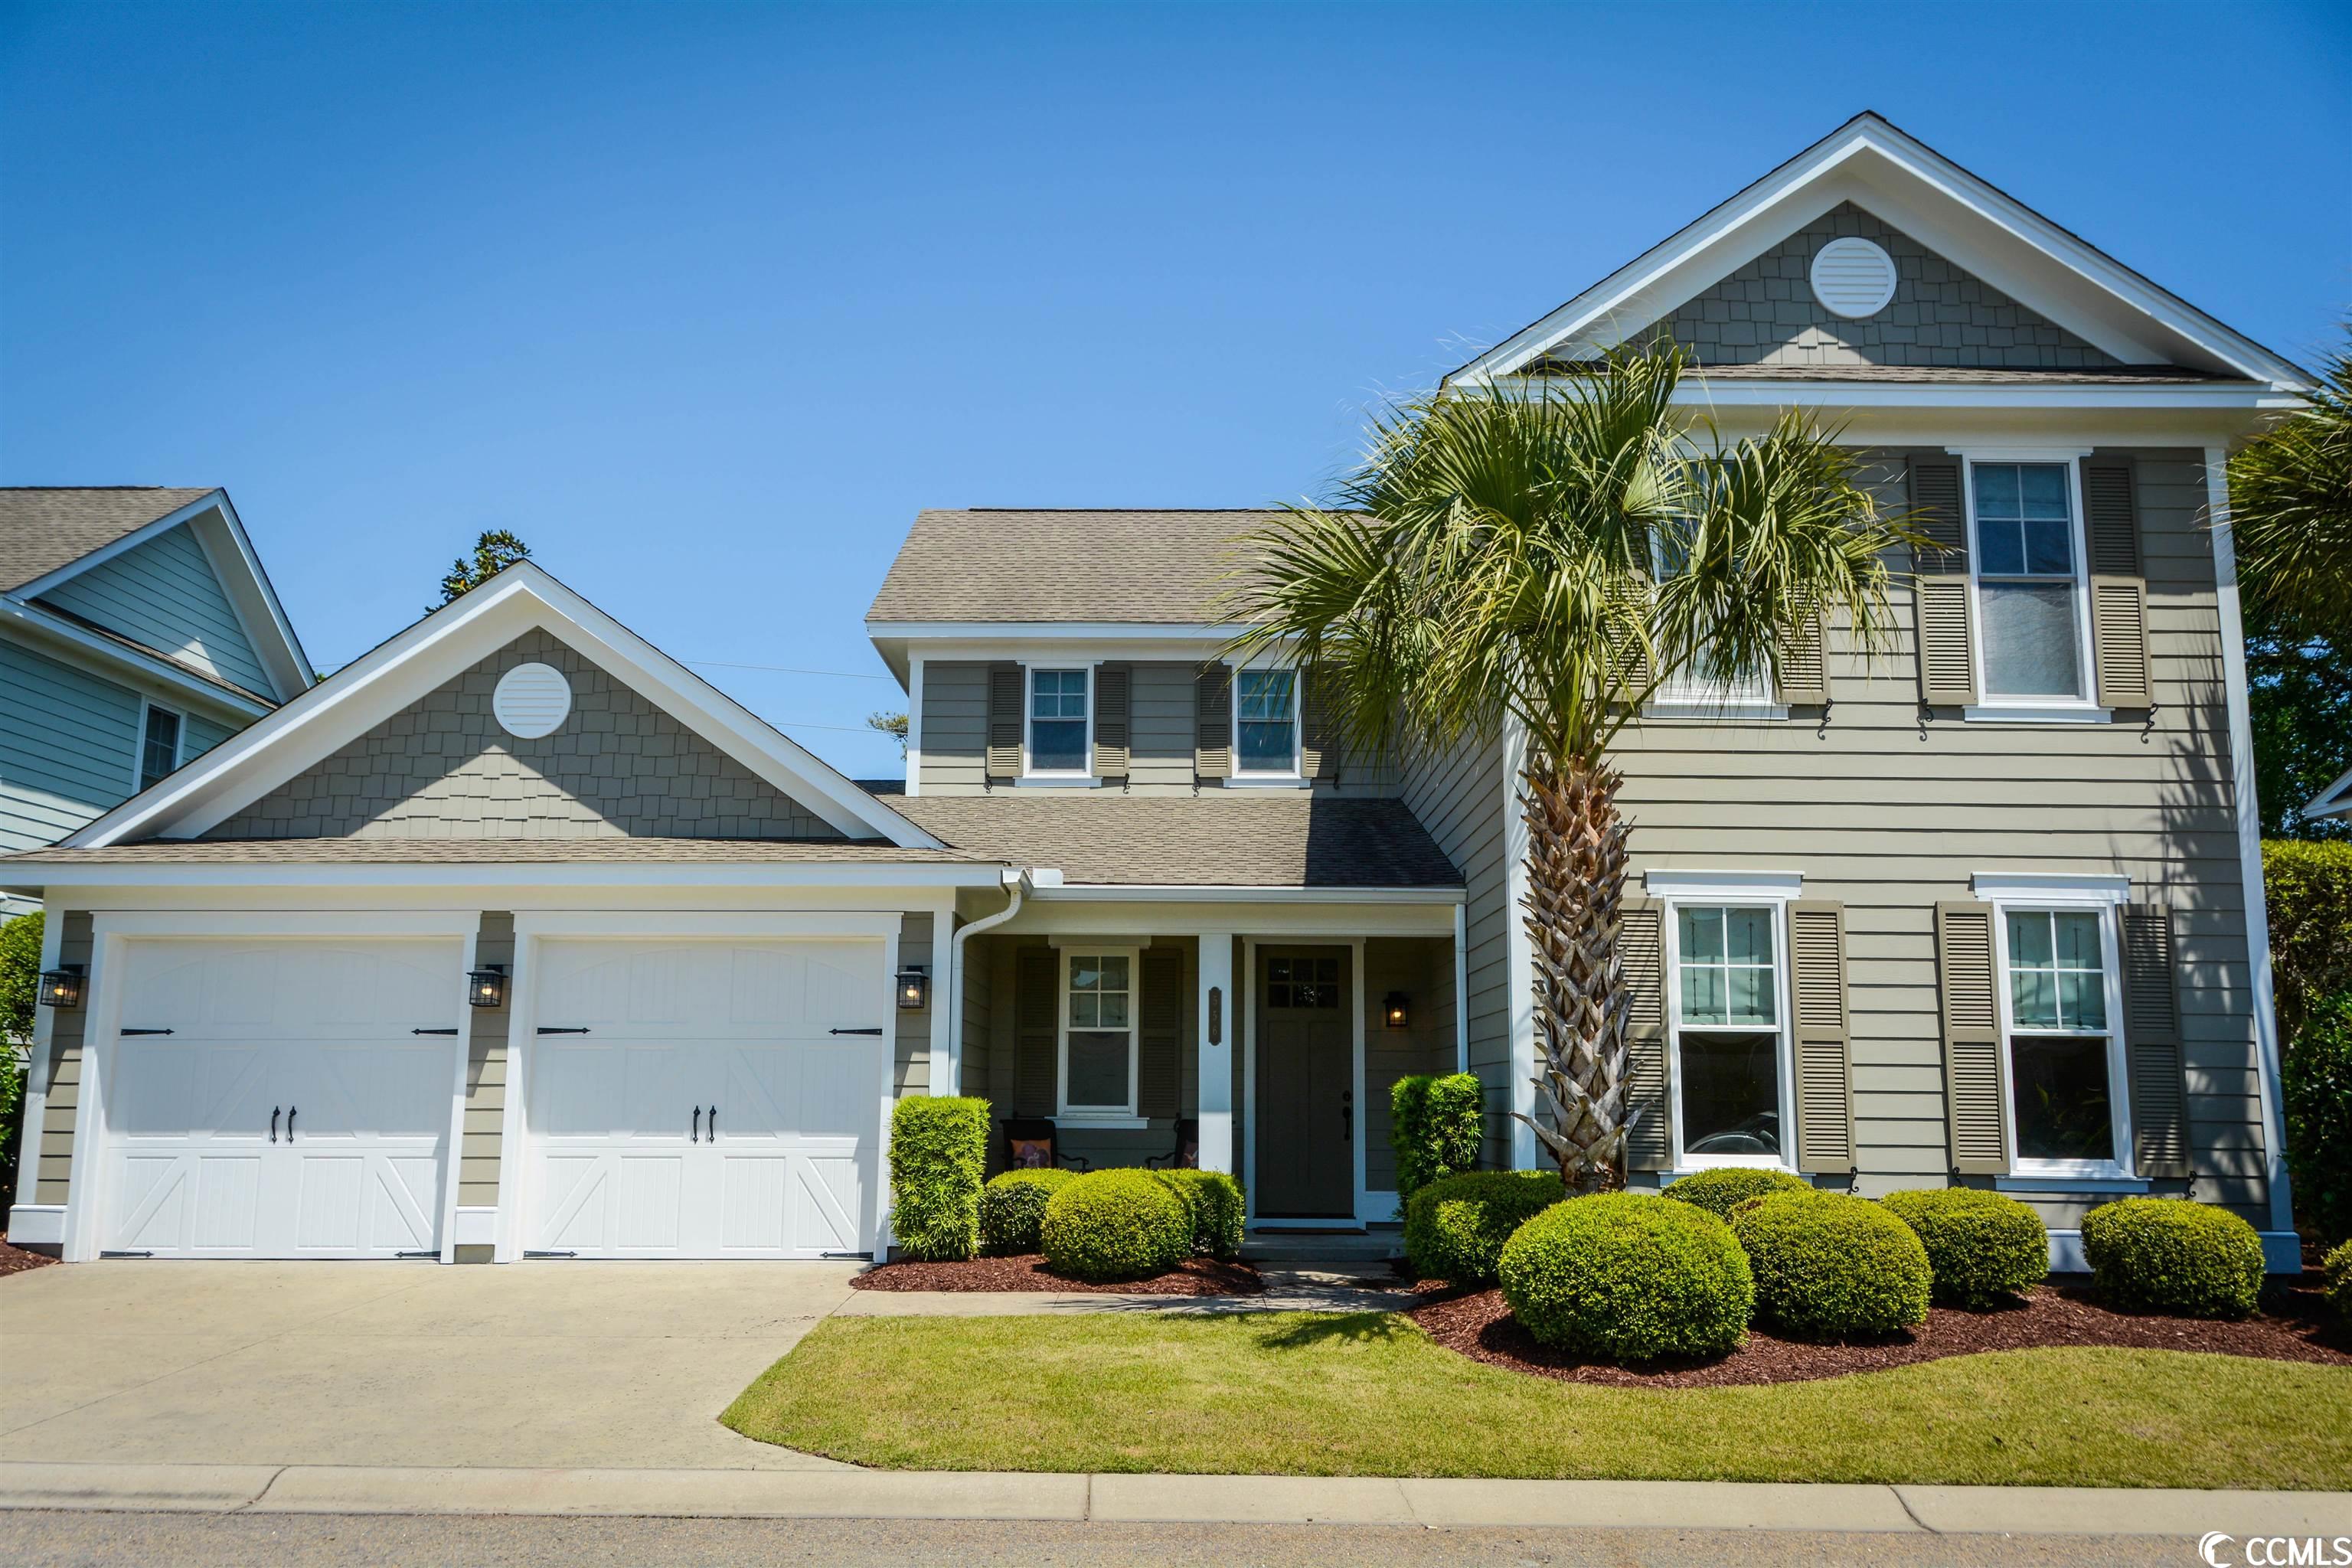 556 Olde Mill Dr. North Myrtle Beach, SC 29582